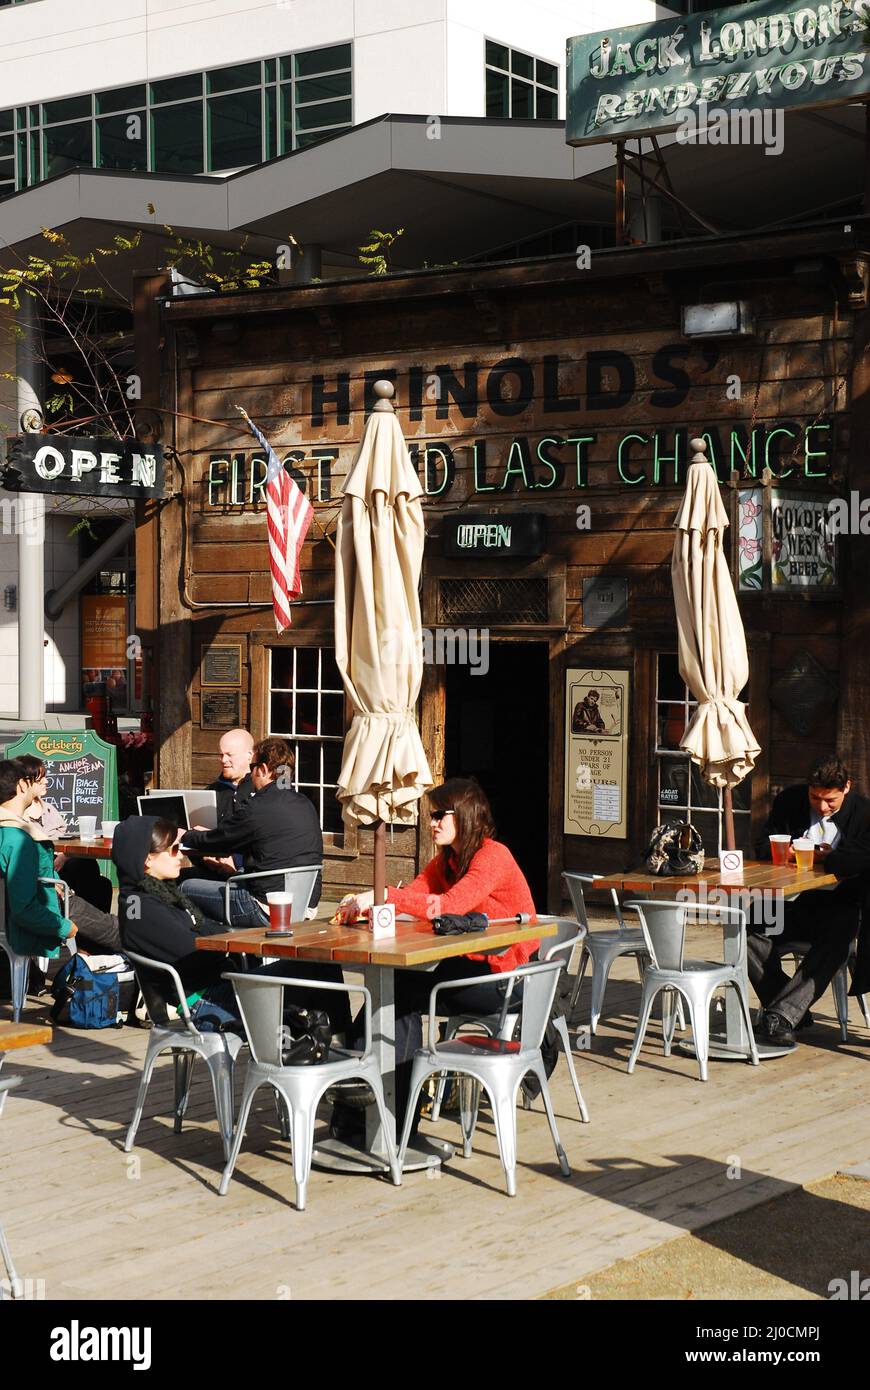 A couple dines alfresco at the Last Chance Saloon in Jack London Square, Oakland, California Stock Photo